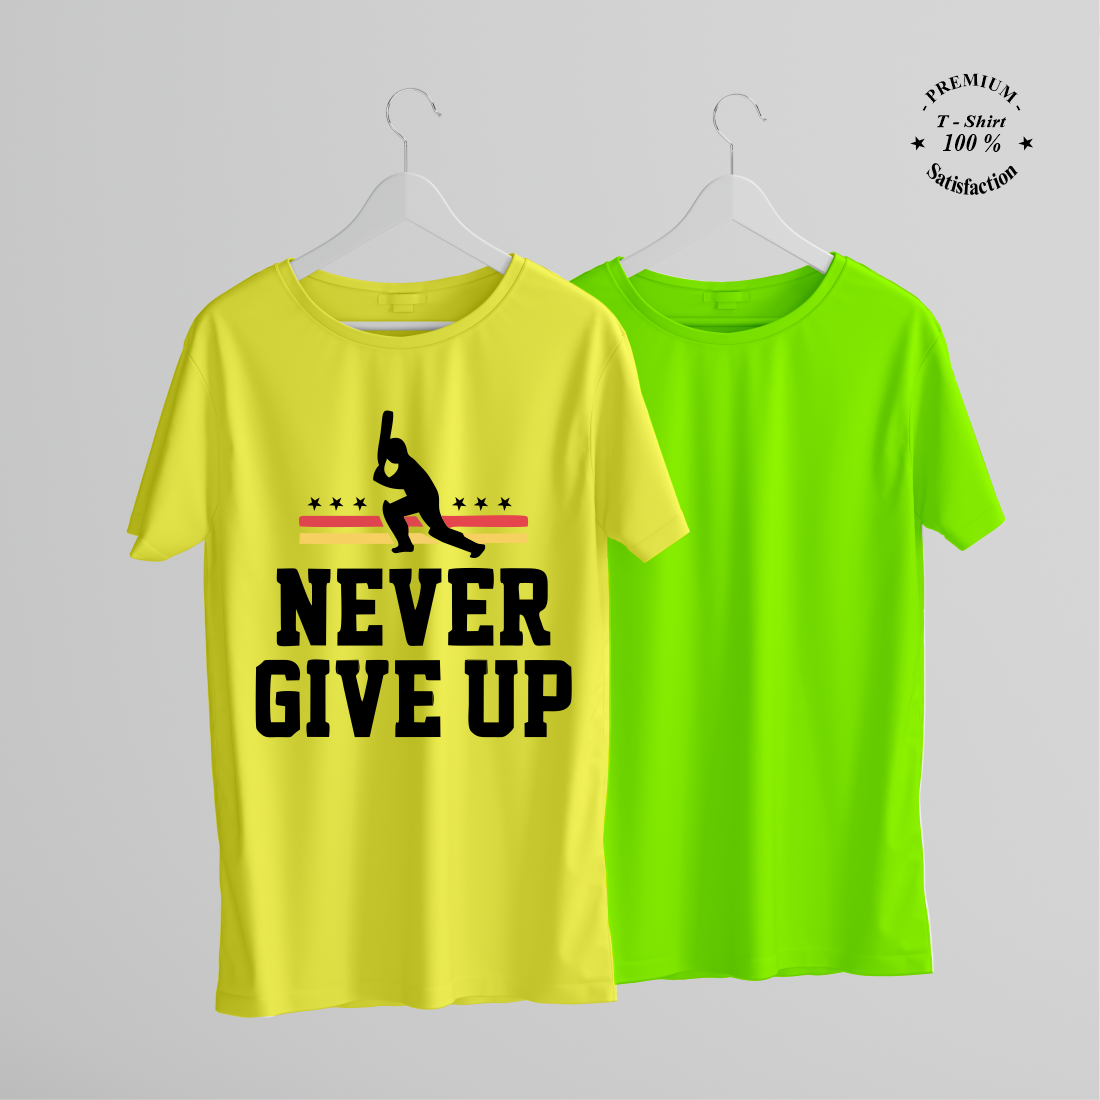 NEVER GIVE UP PRINTED T-SHIRTS